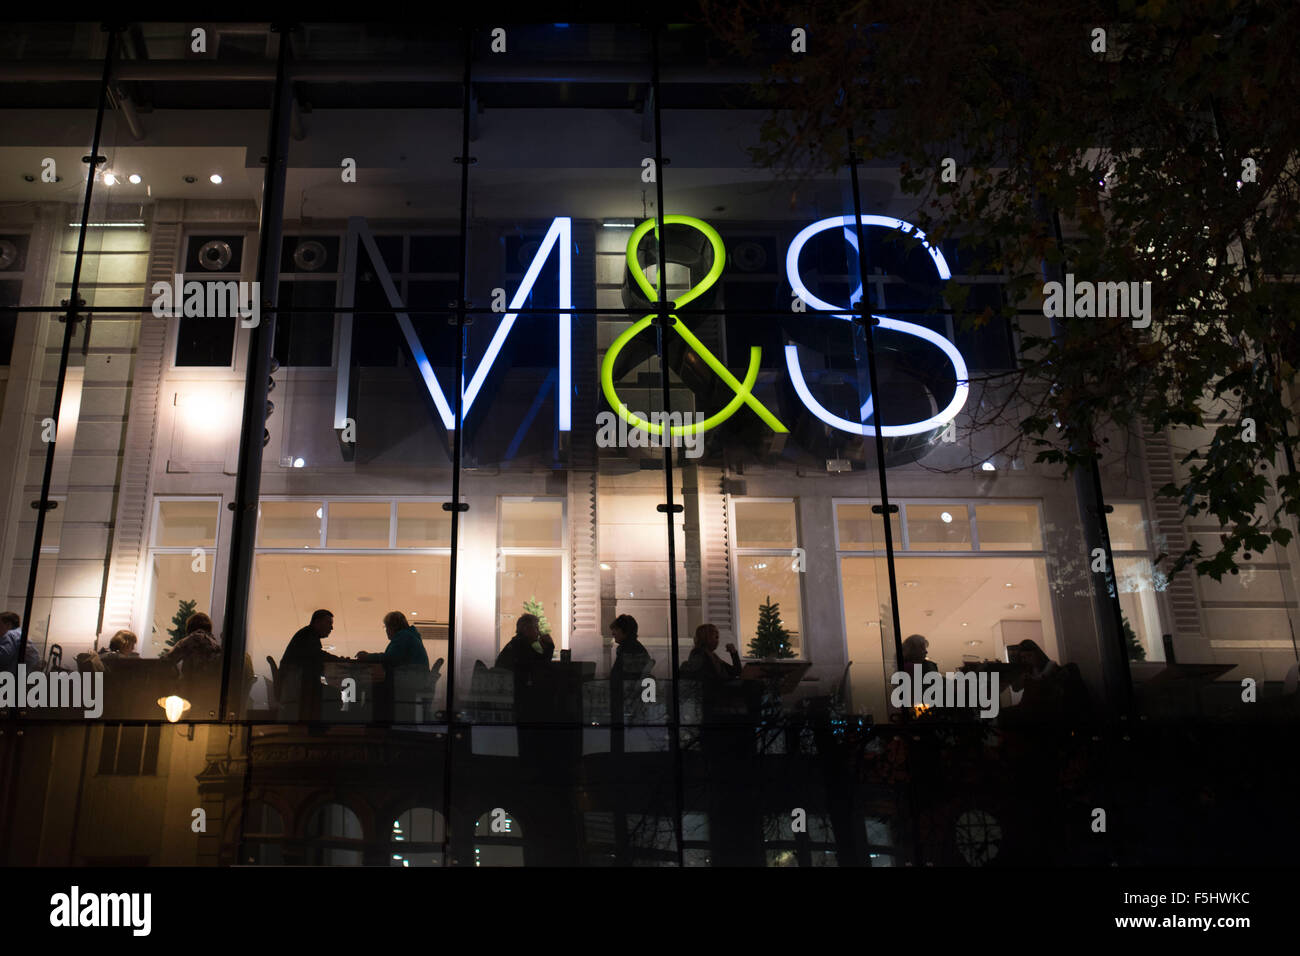 A Mark's and Spencers (M&S) retail store at night. Stock Photo